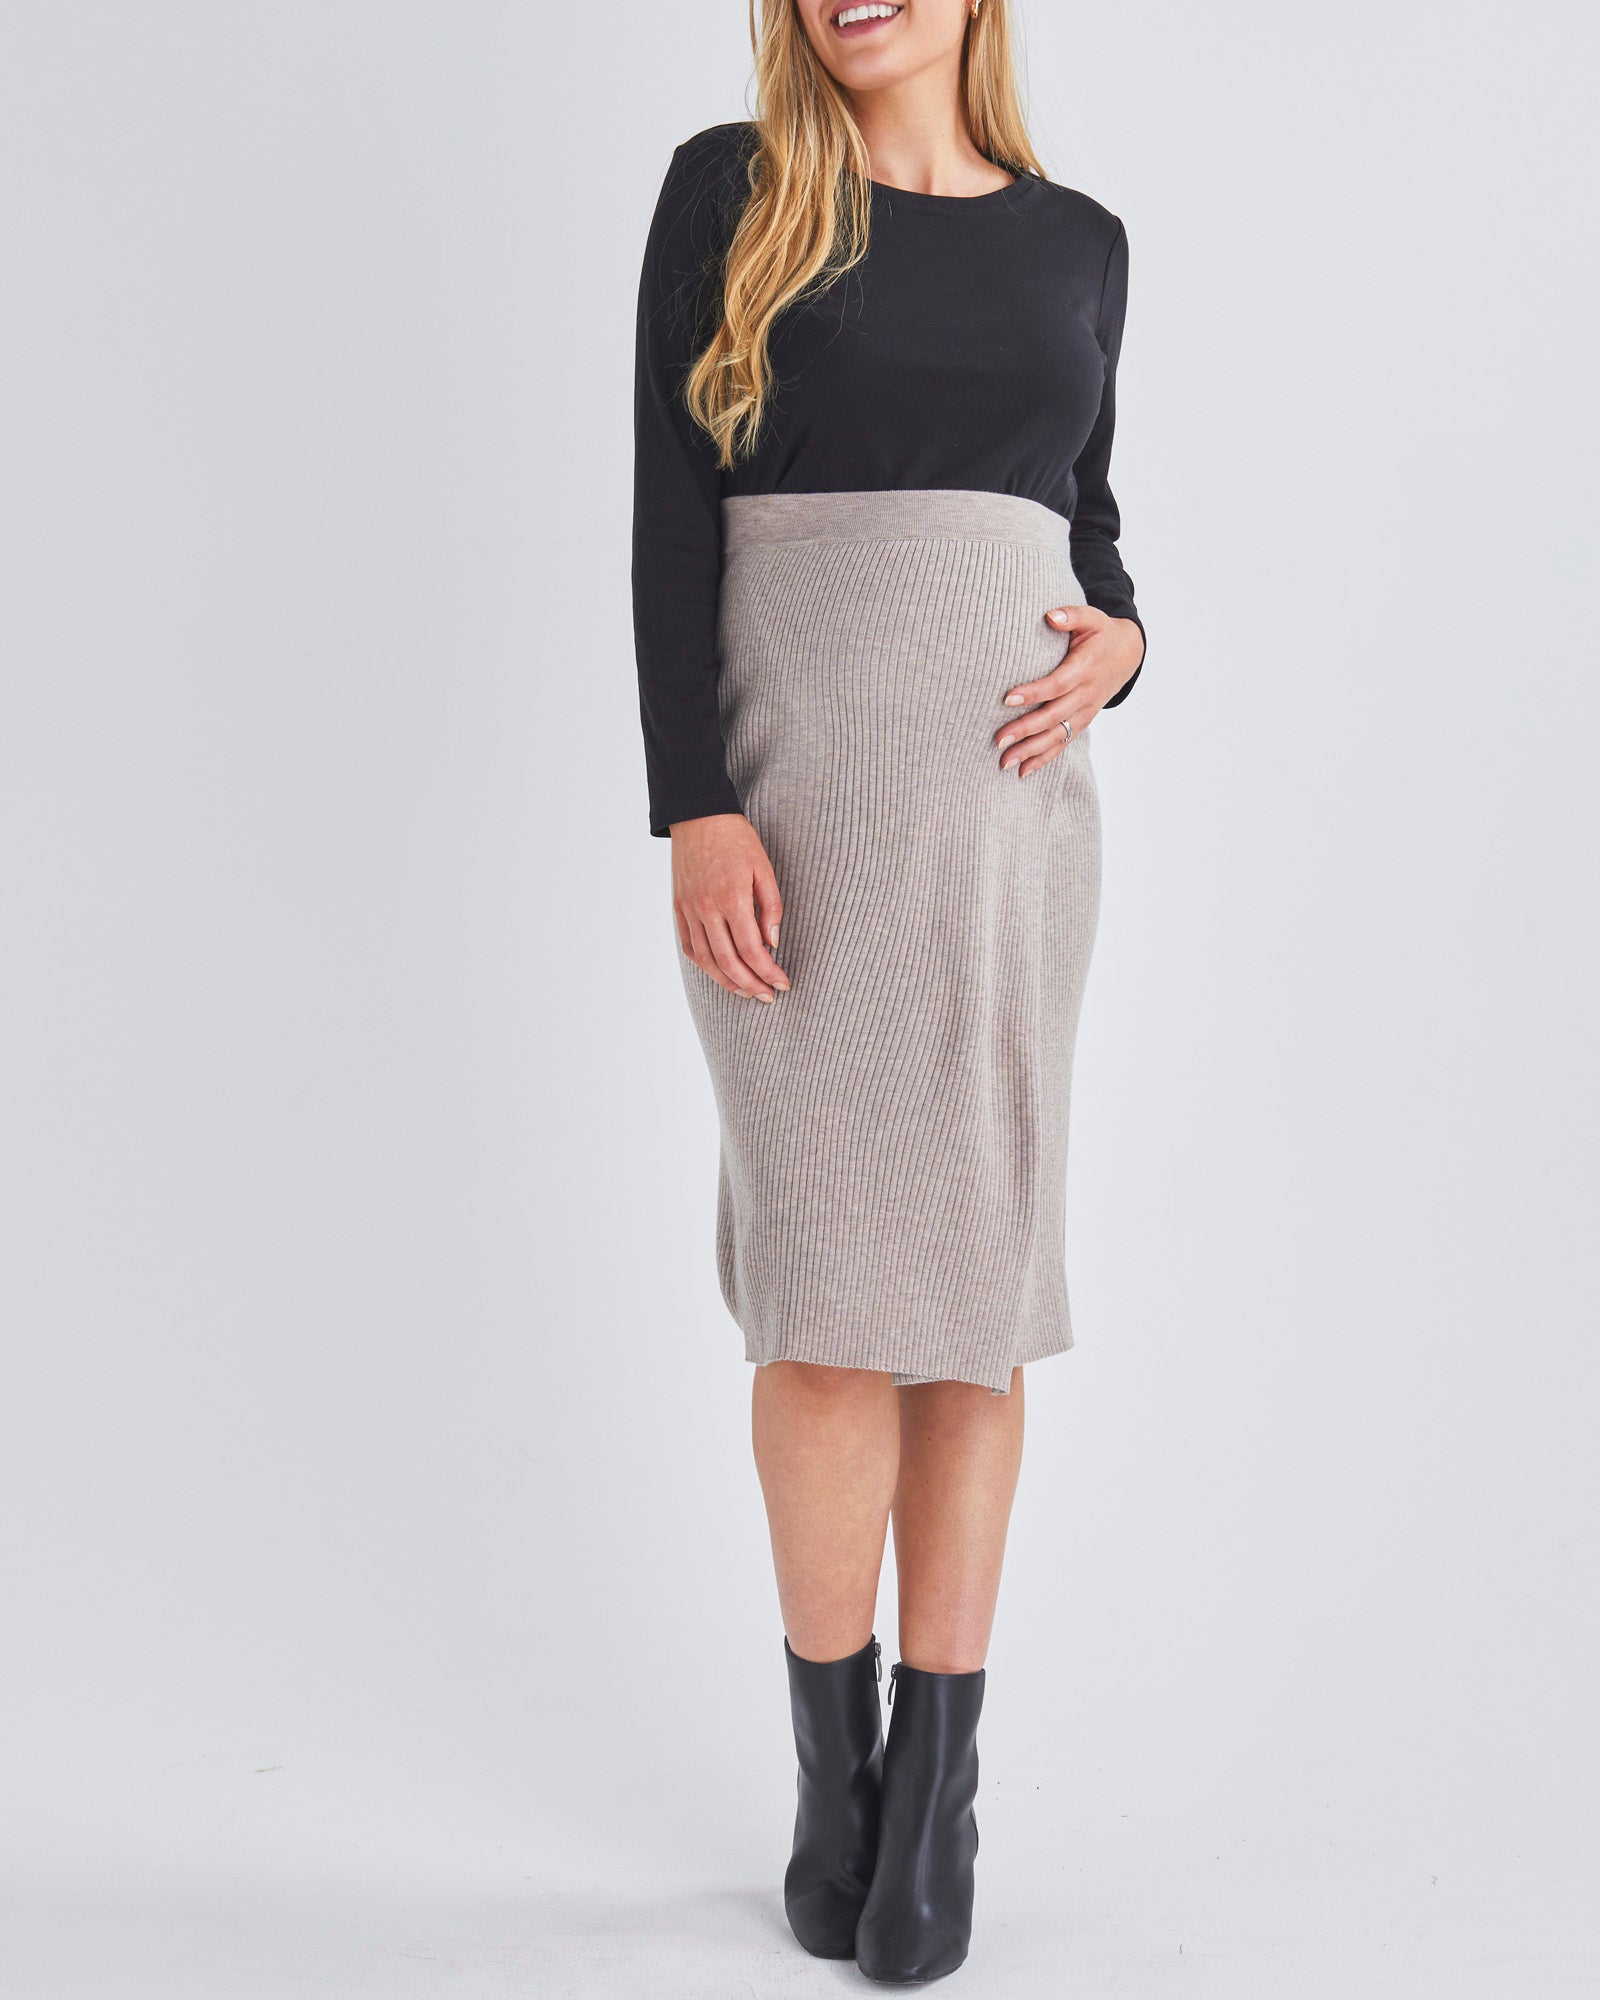 A Pregnant Woman Wearing Long Sleeve Cotton Black Maternity Crop Top and Skirt from Angel Maternity